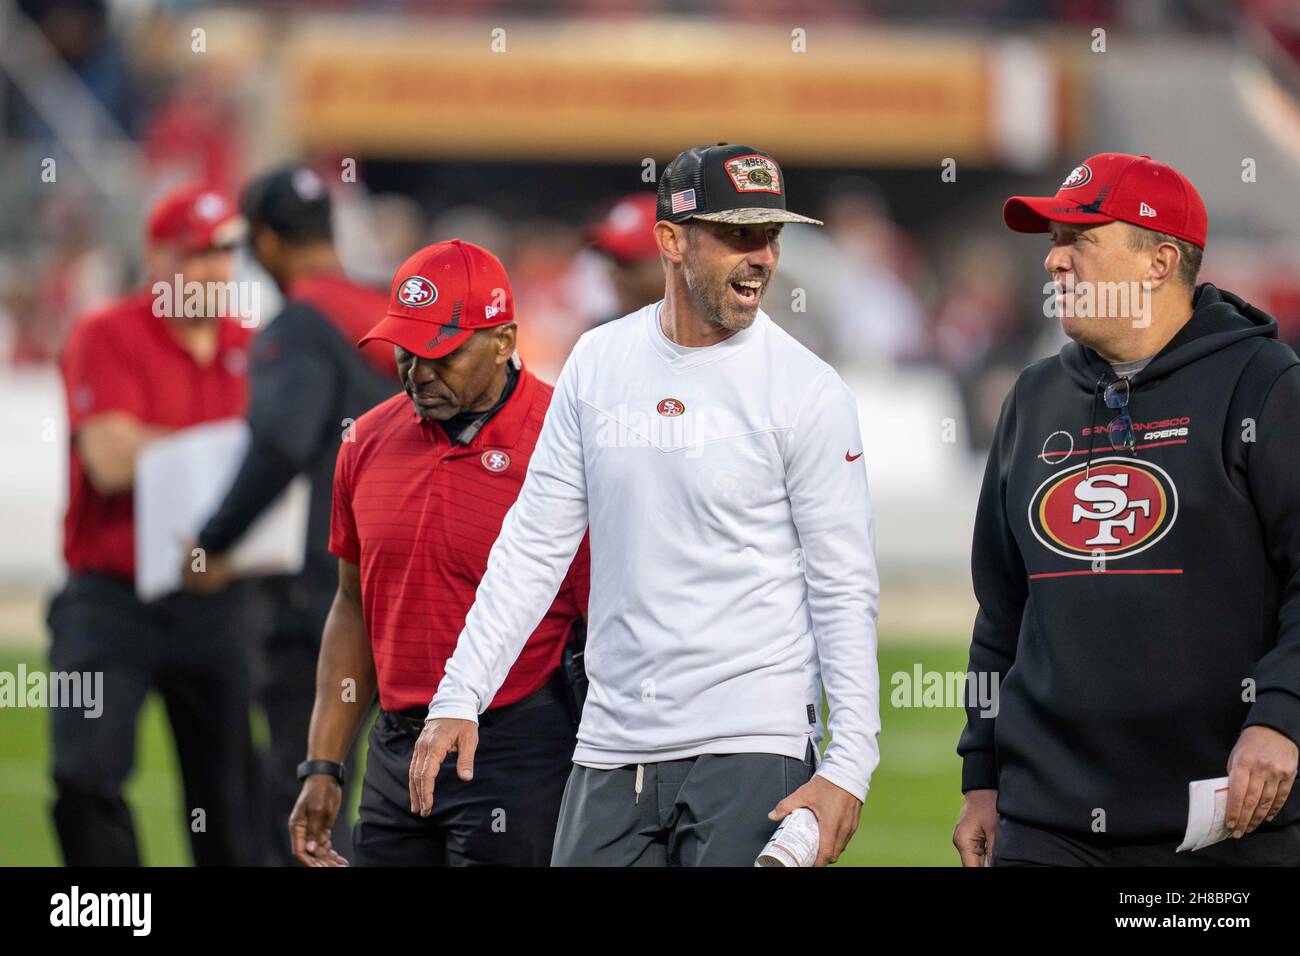 San Francisco 49ers head coach Kyle Shanahan celebrates walking off the field after the end of the game against the Minnesota Vikings in San Francisco Stock Photo